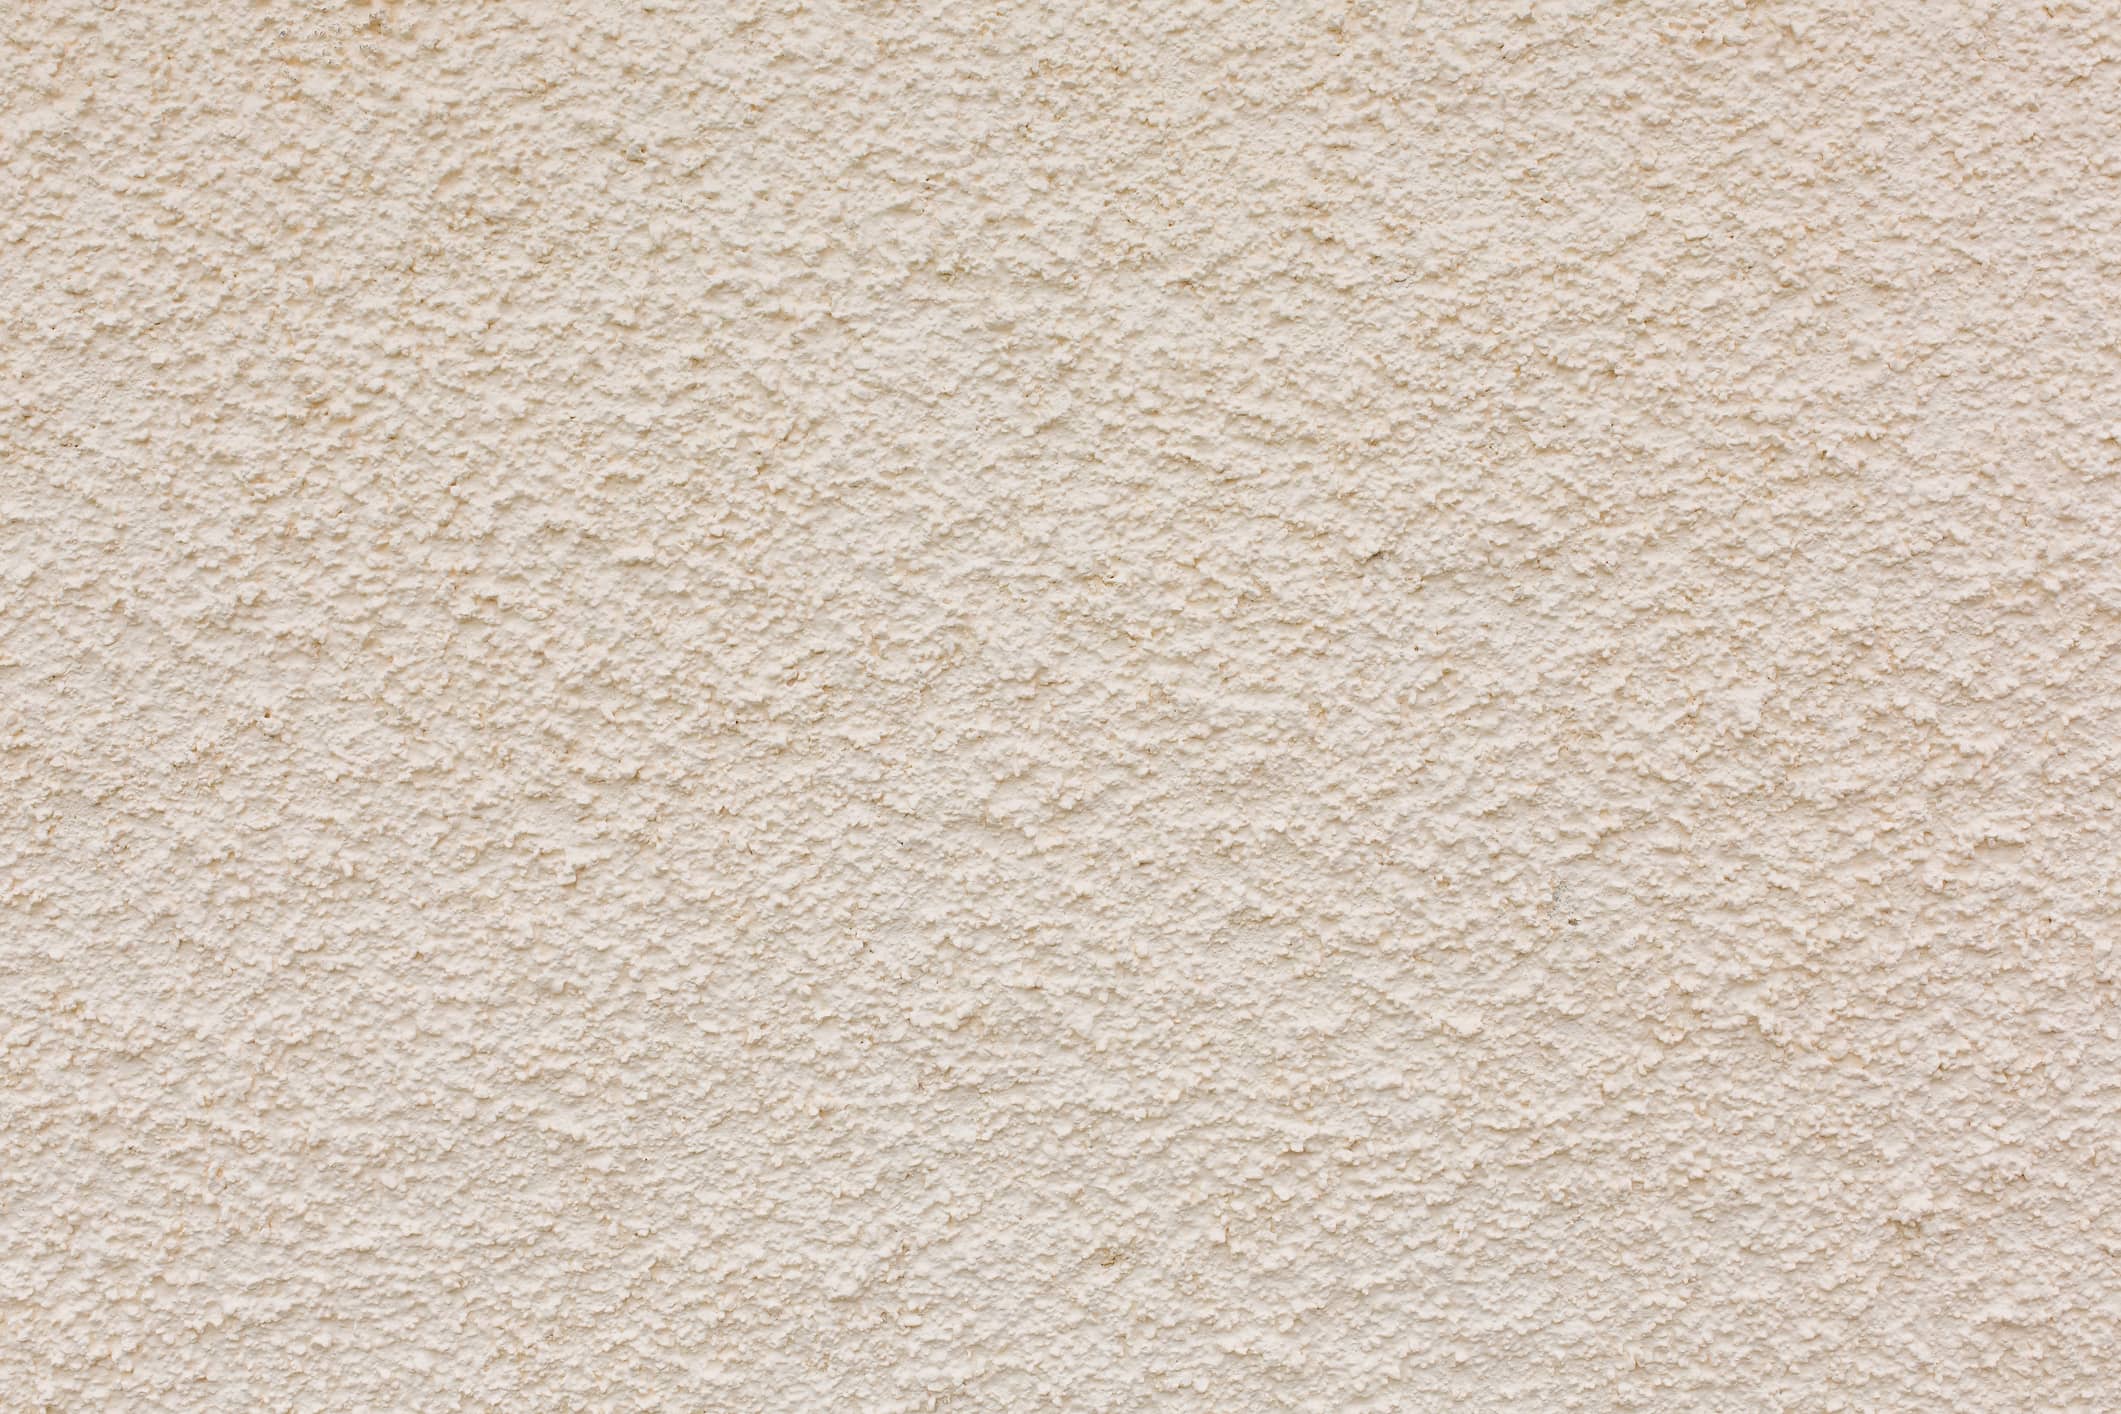 How to Paint a Popcorn Ceiling Without Making a Mess